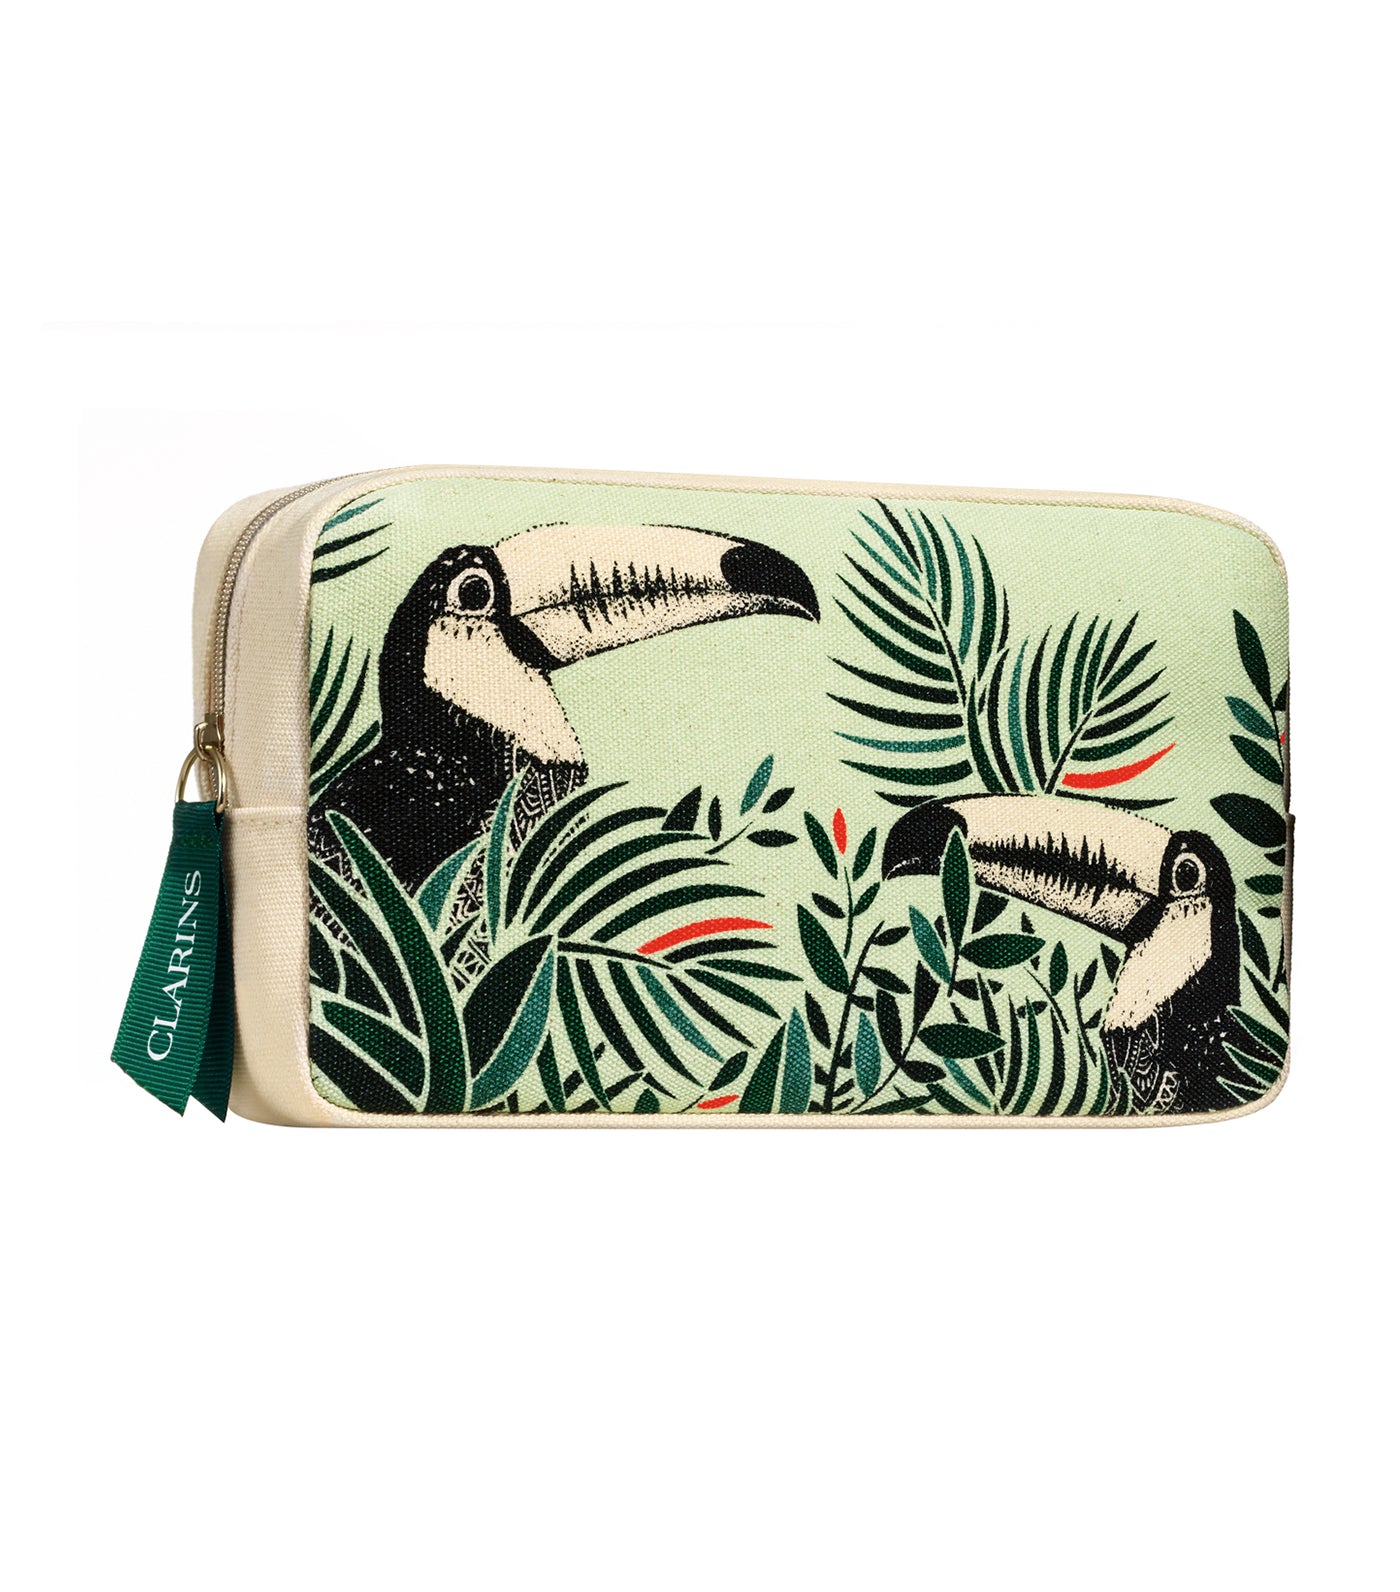 Free Limited-Edition Toucan-Print Cosmetics Pouch